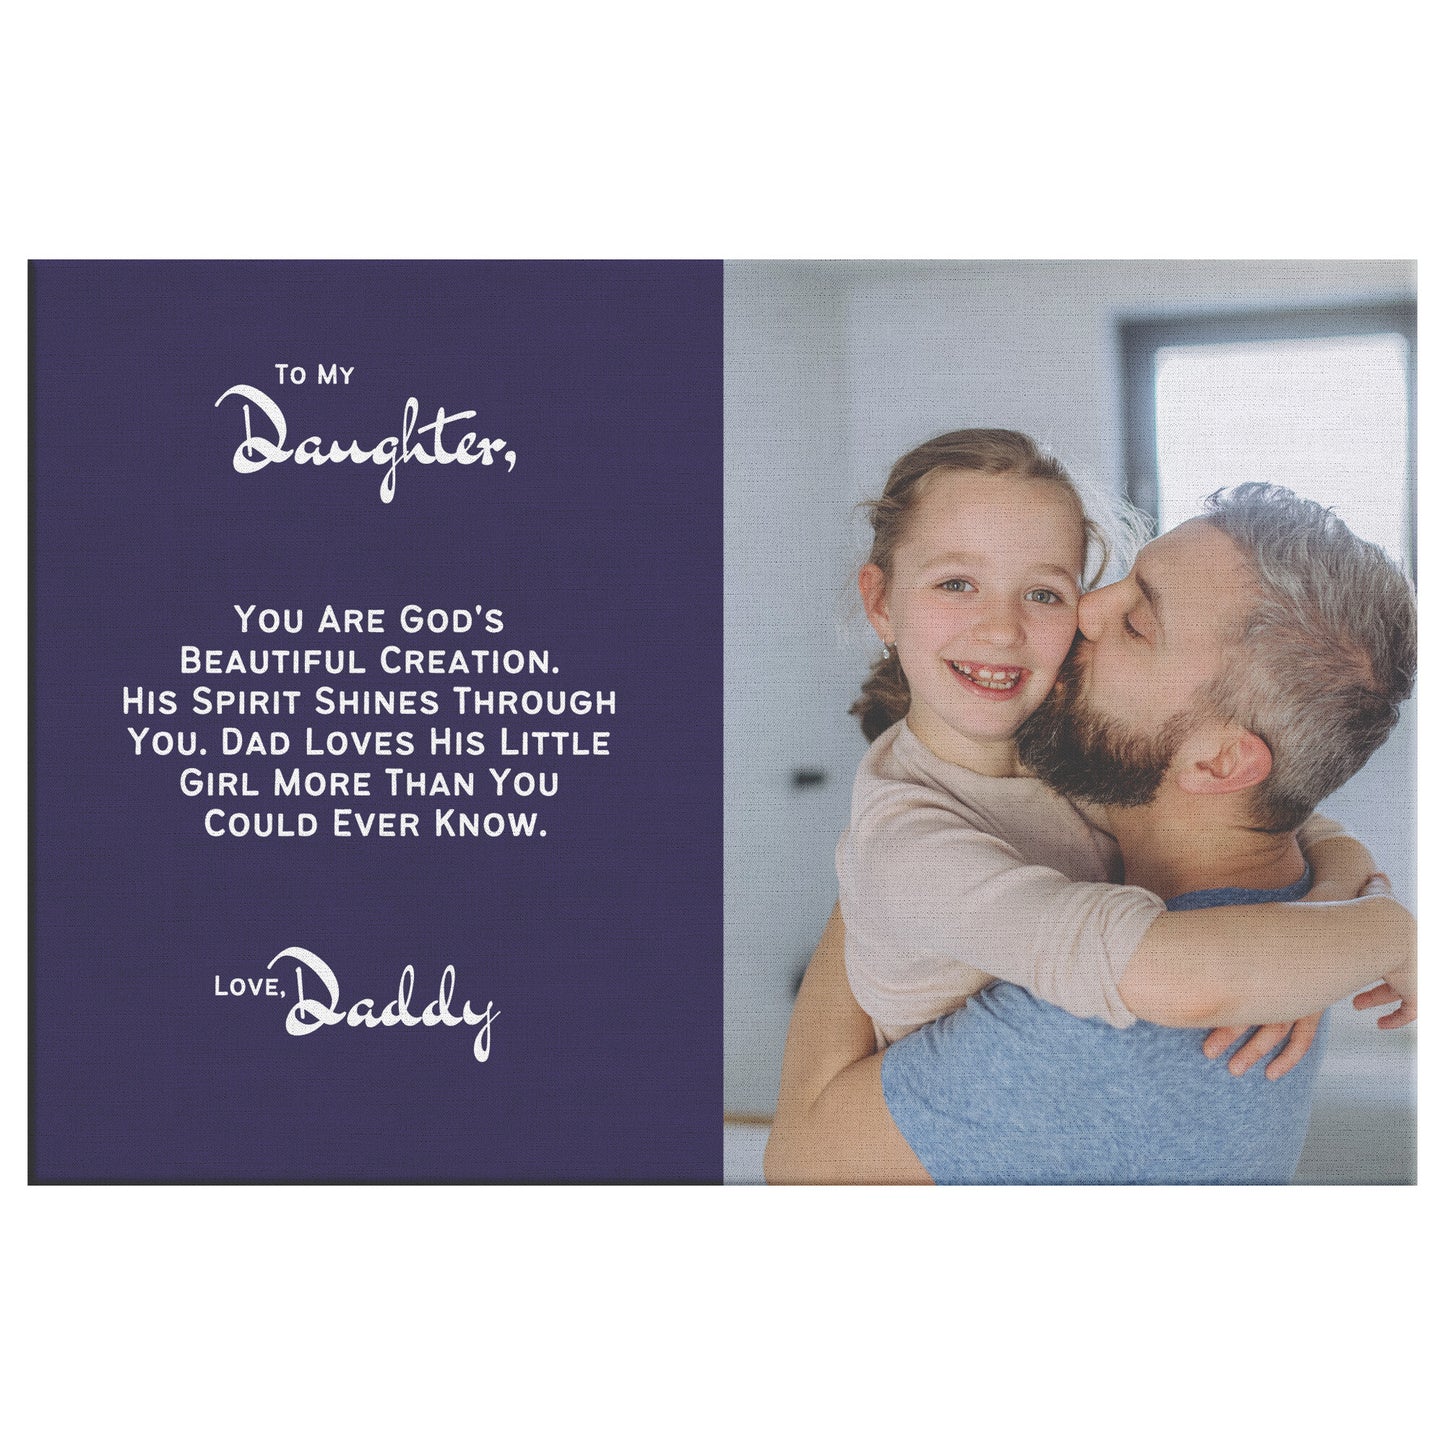 Personalized Daddy/Daughter, God's Beautiful Creation Canvas Wall Art